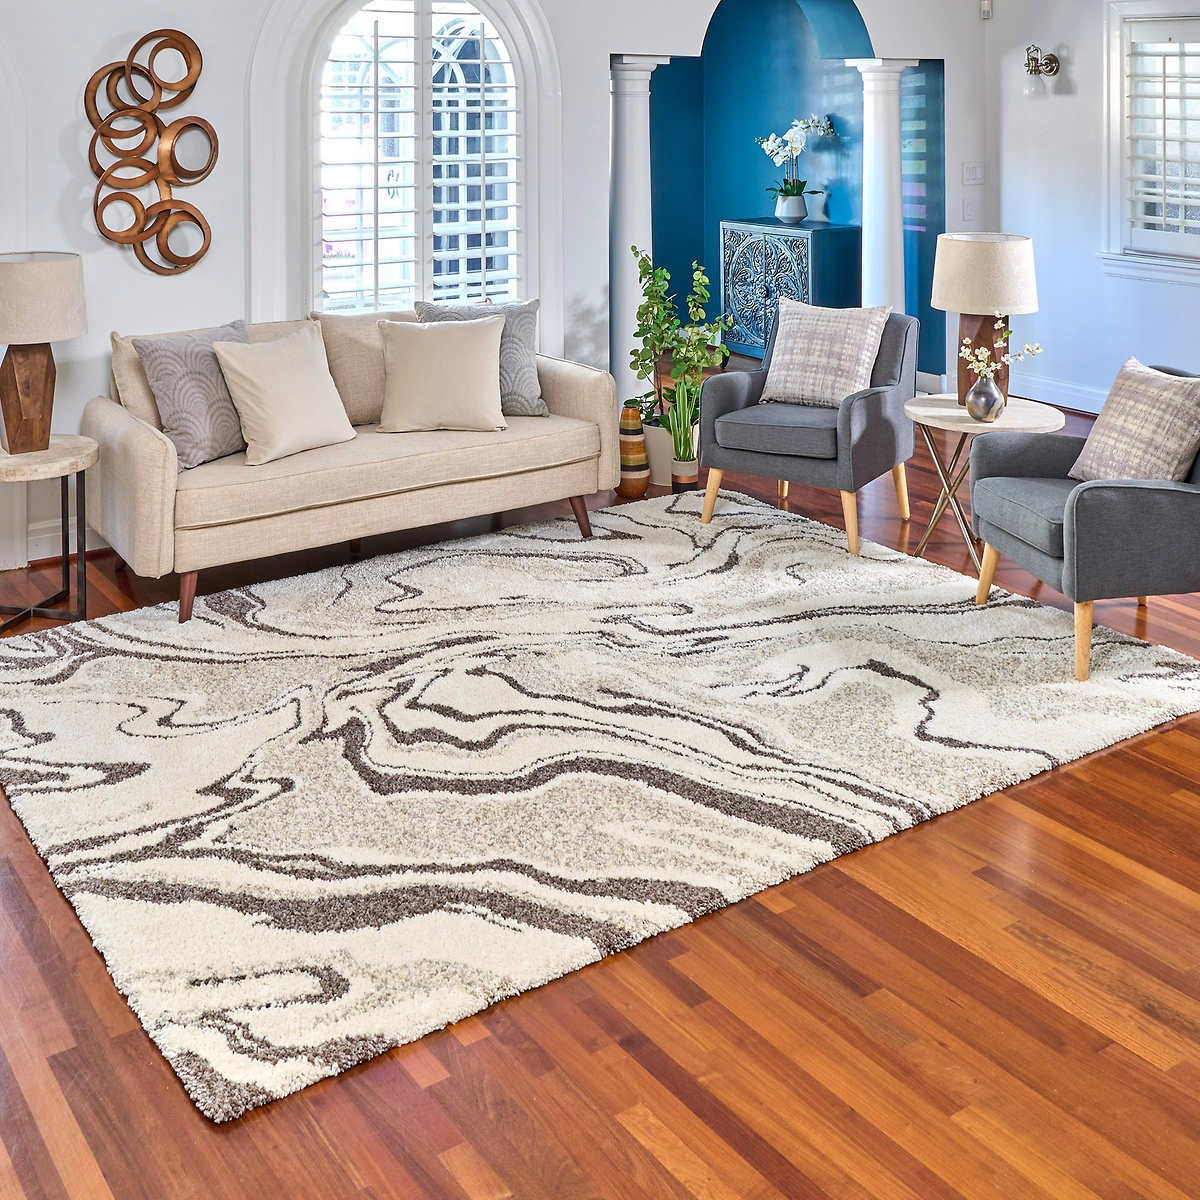 Thomasville Hudson Lush Shag Area Rug - 5ft 3in * 7ft 5in - Micco Grey Cream HOG-Home Office Garden online marketplace.